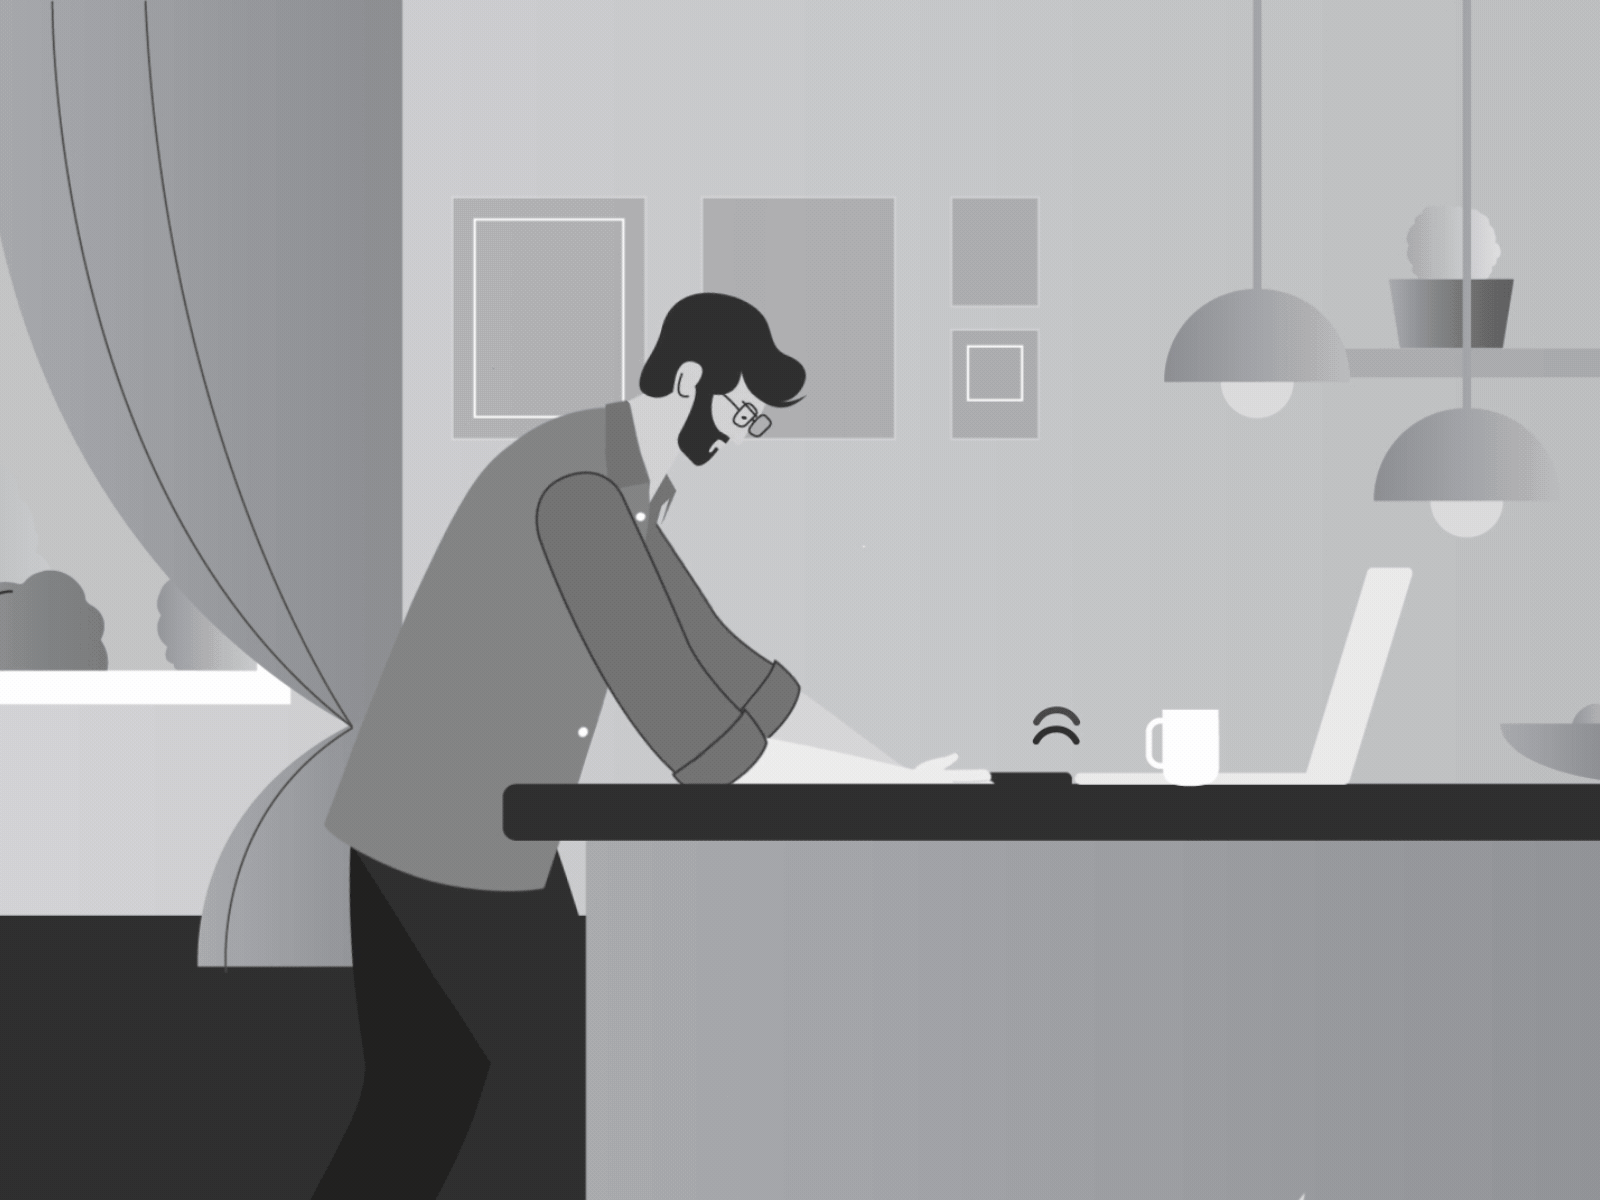 Man Working On Computer Animation by Dionis Railean on Dribbble